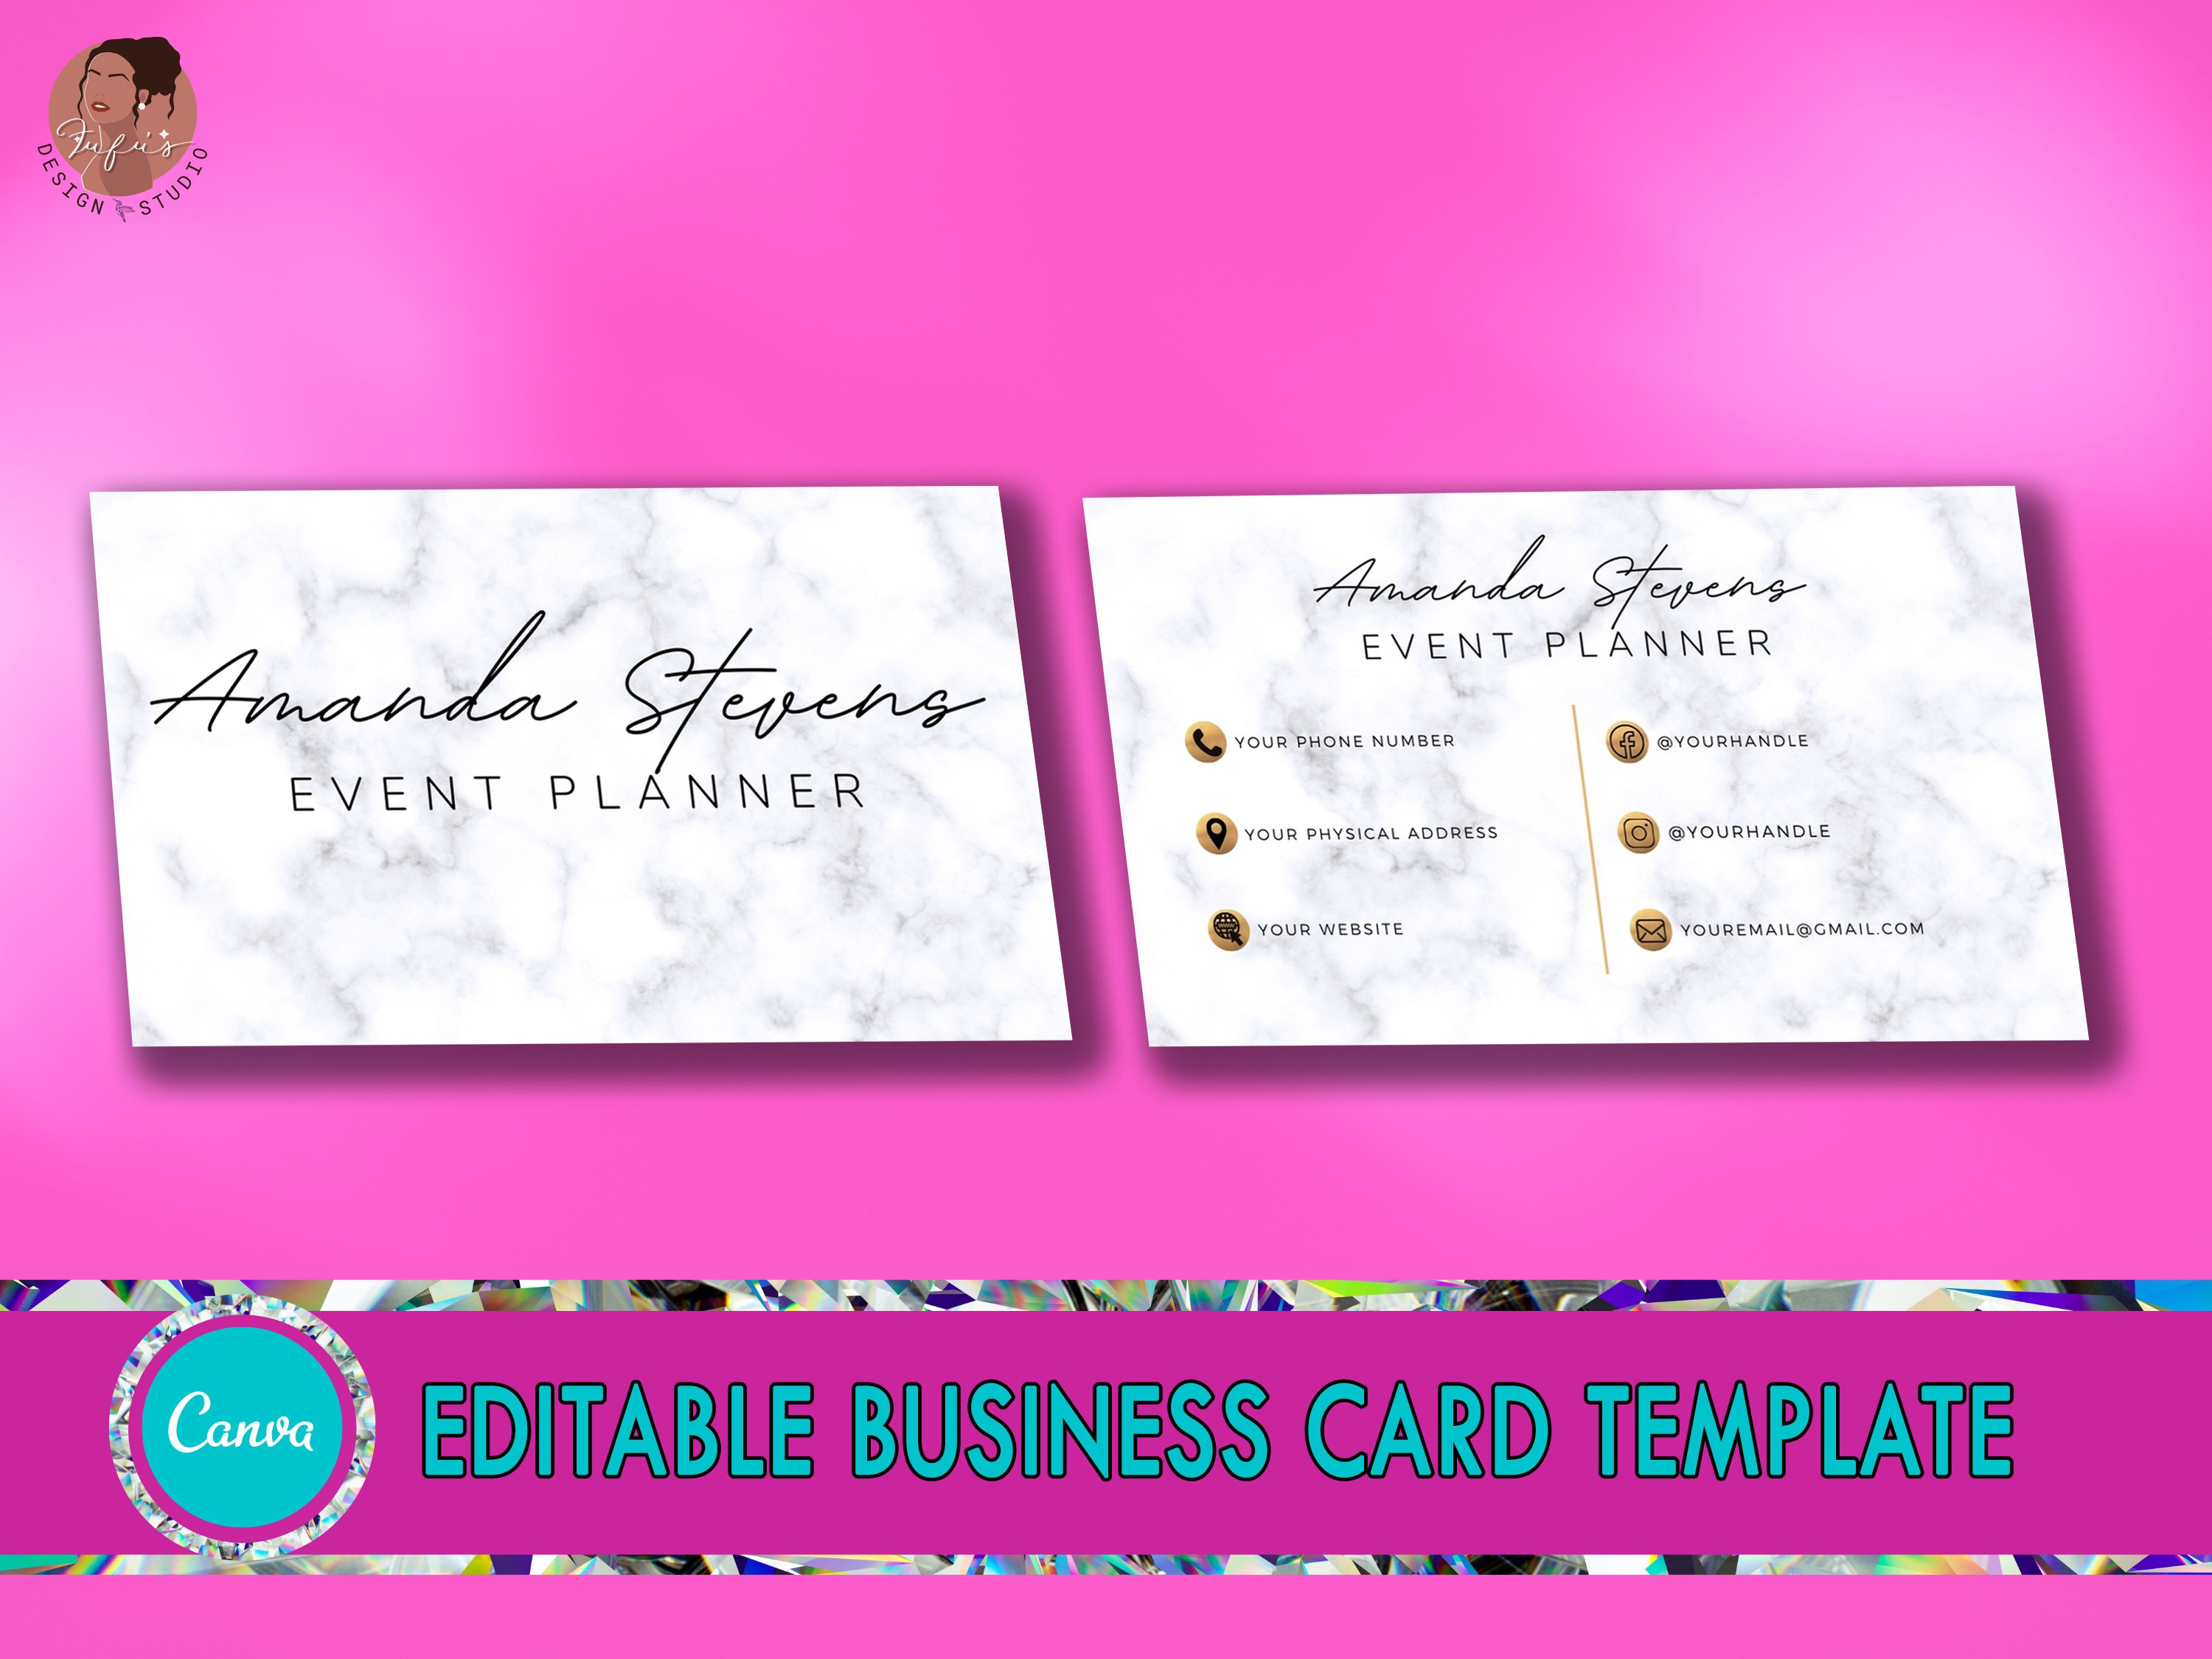 Event Planner Business Card Diy Editable Template Canva Etsy